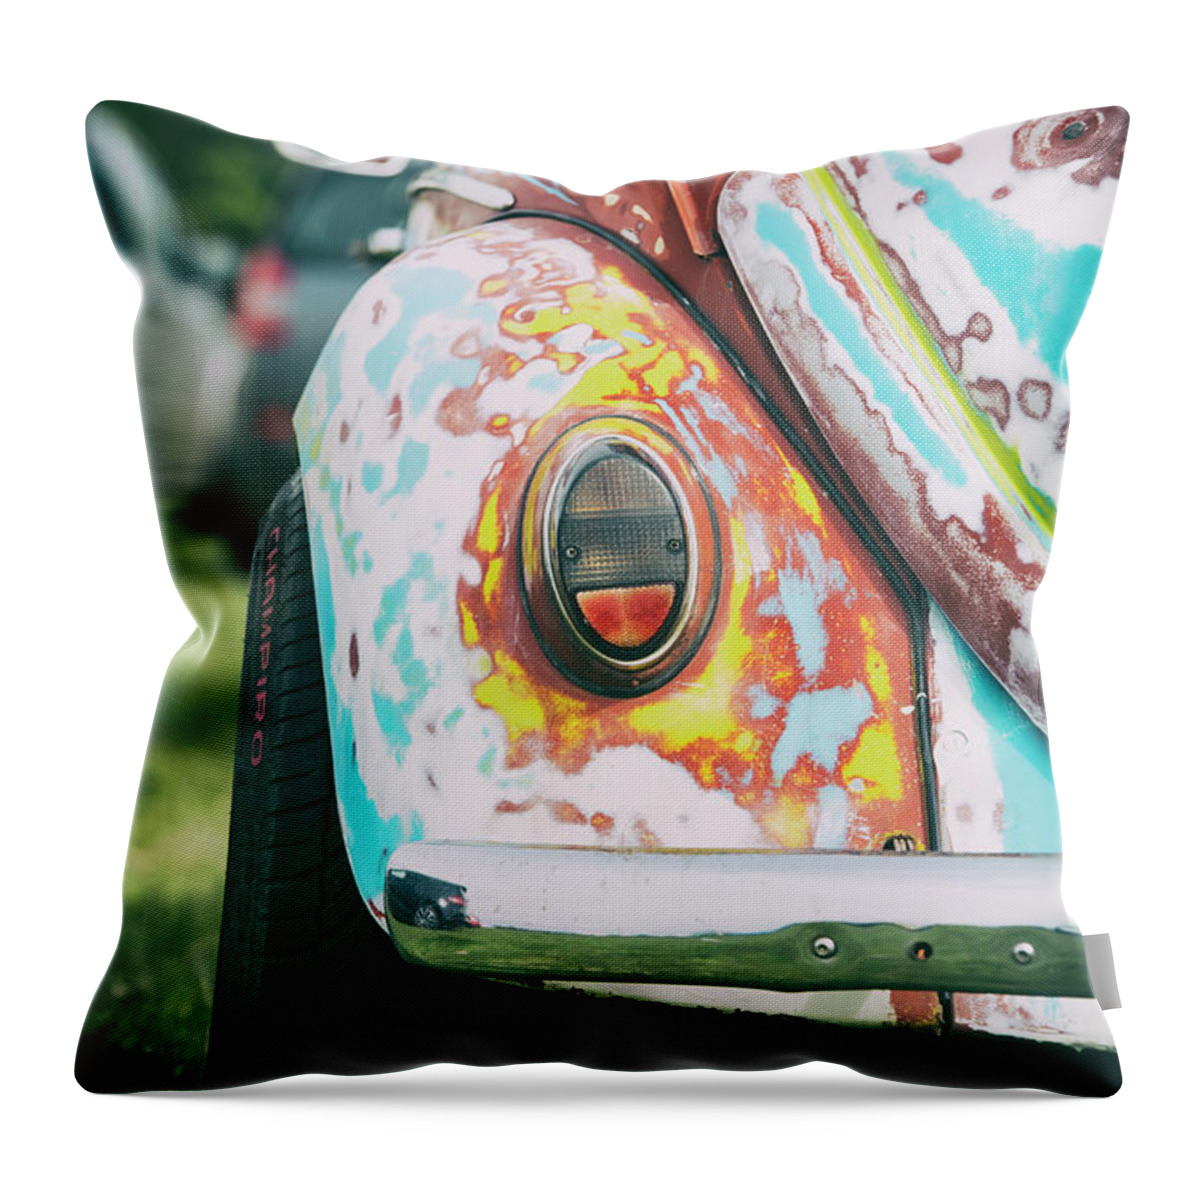 Vw Throw Pillow featuring the photograph Colourful Rat VW Beetle by Tim Gainey